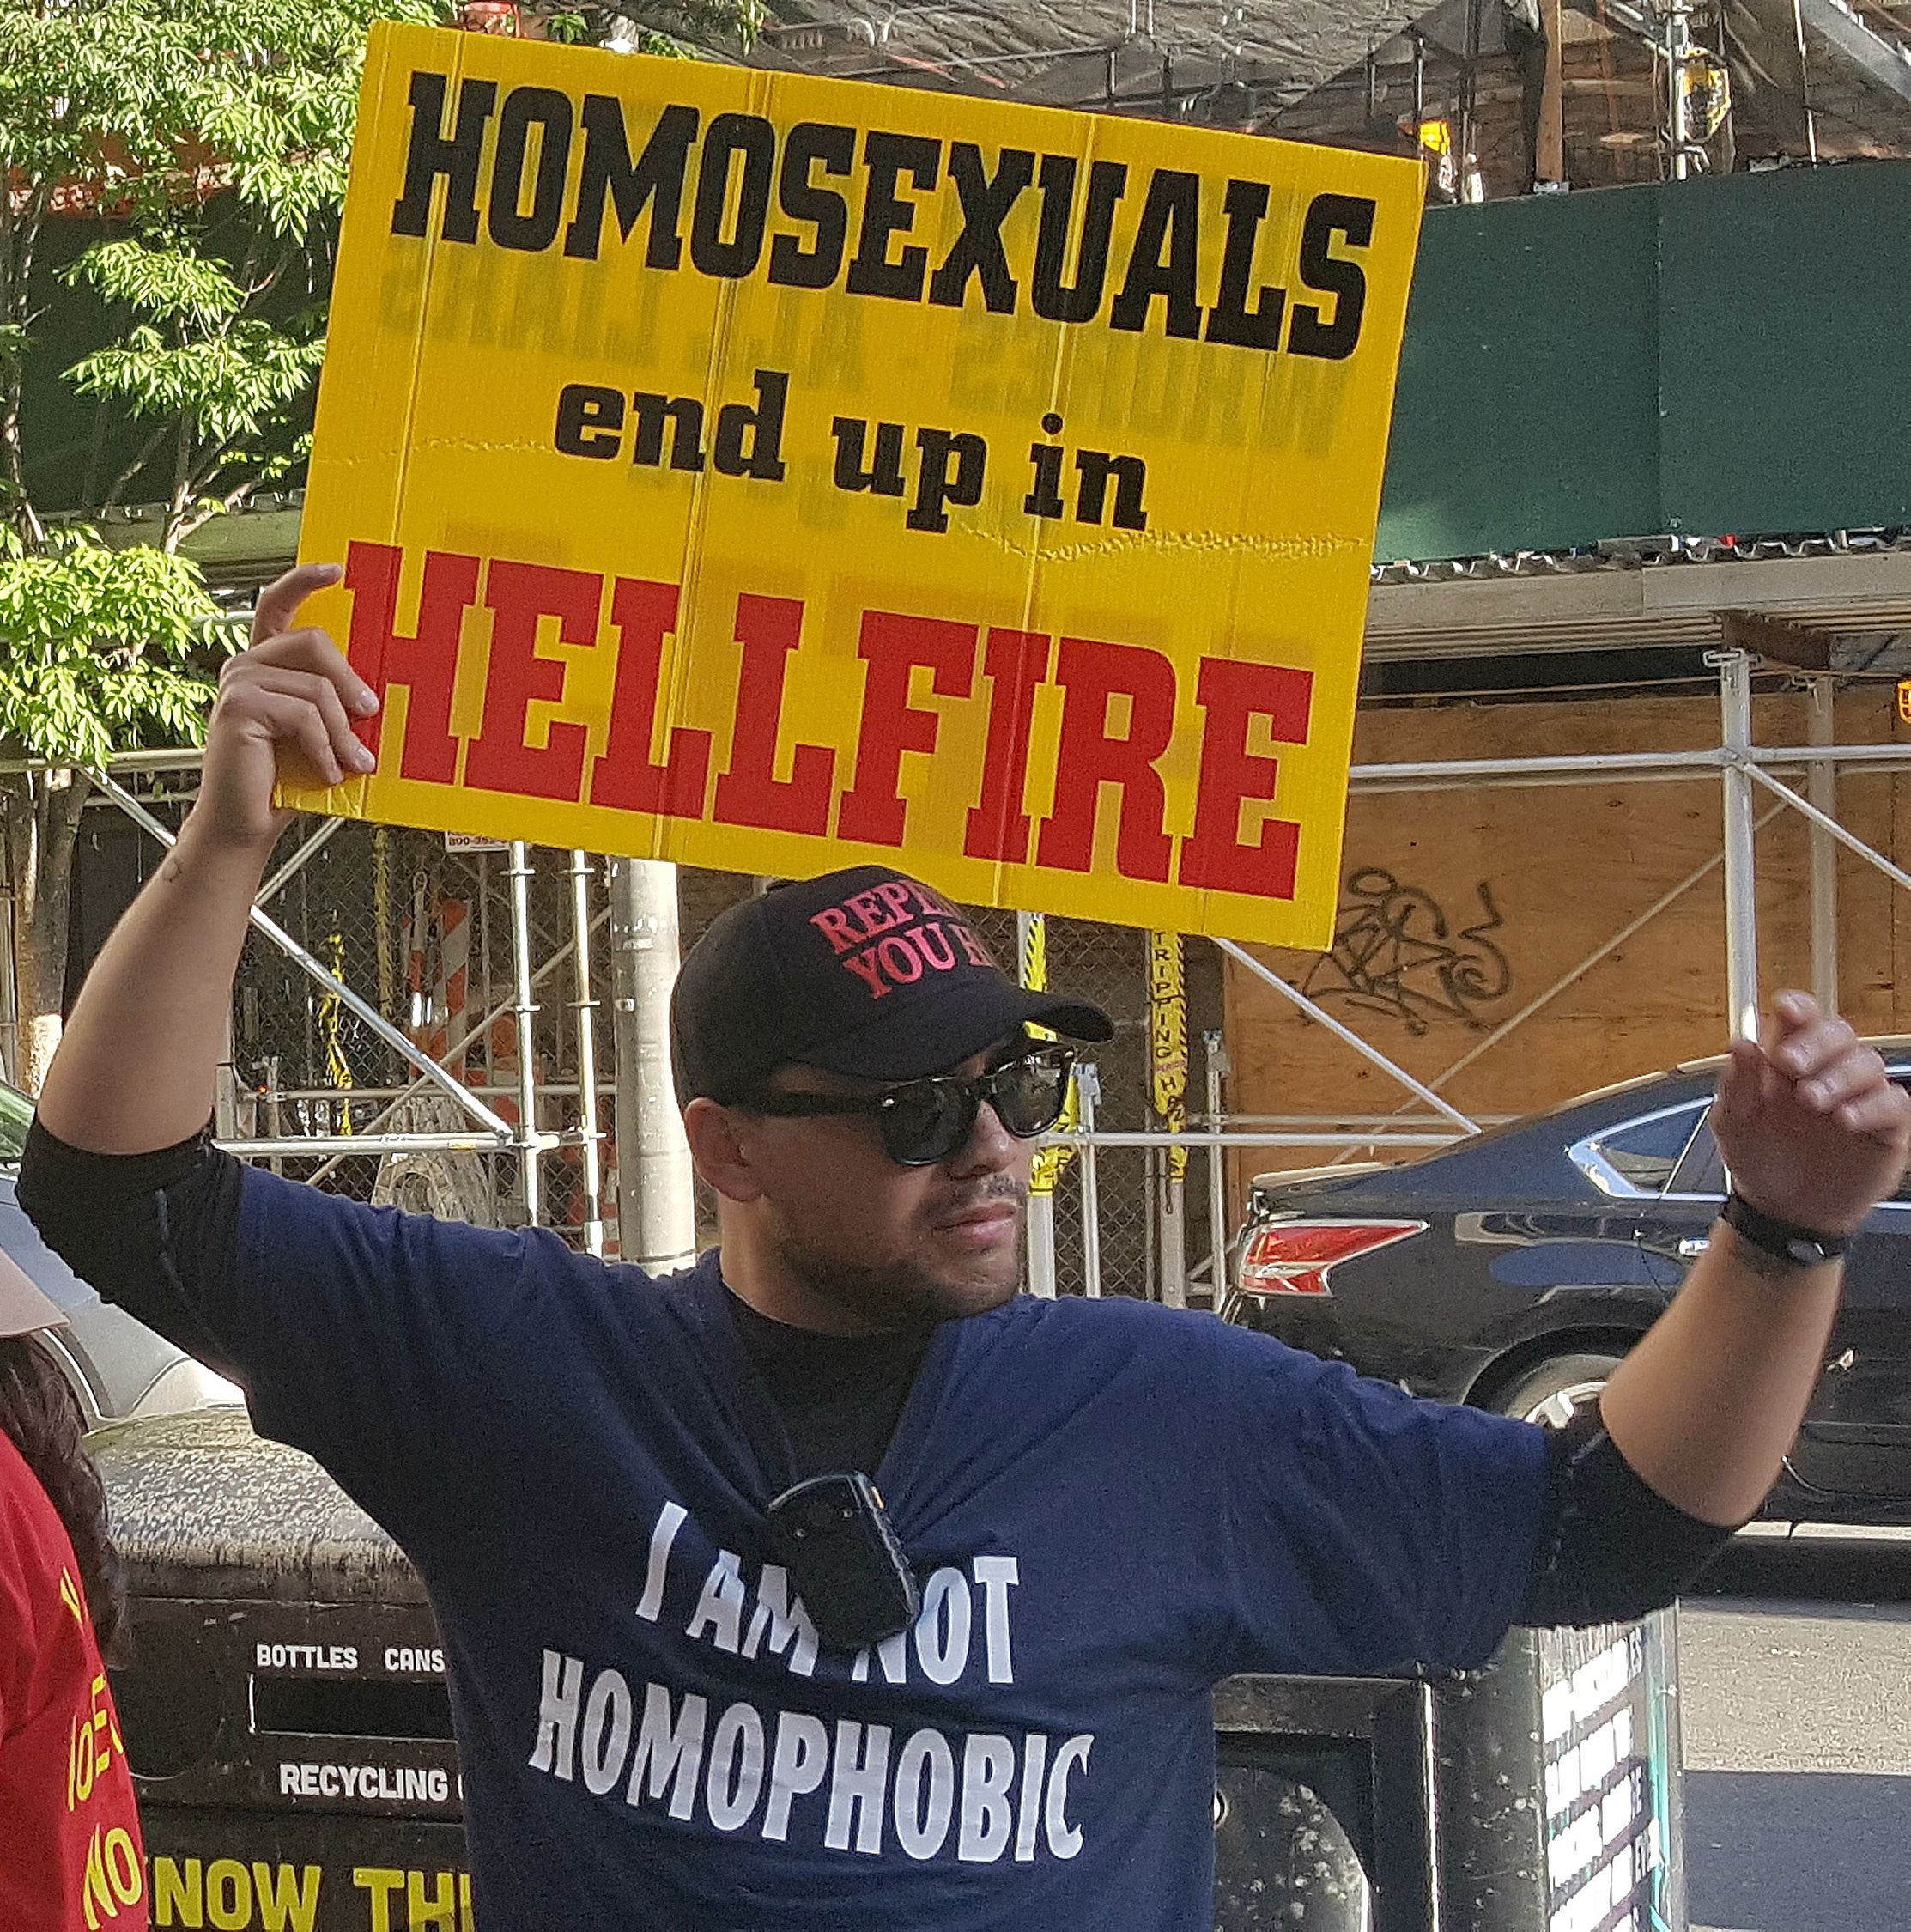 A protestor holds a sign that reads "Homosexuals end up in Hellfire."